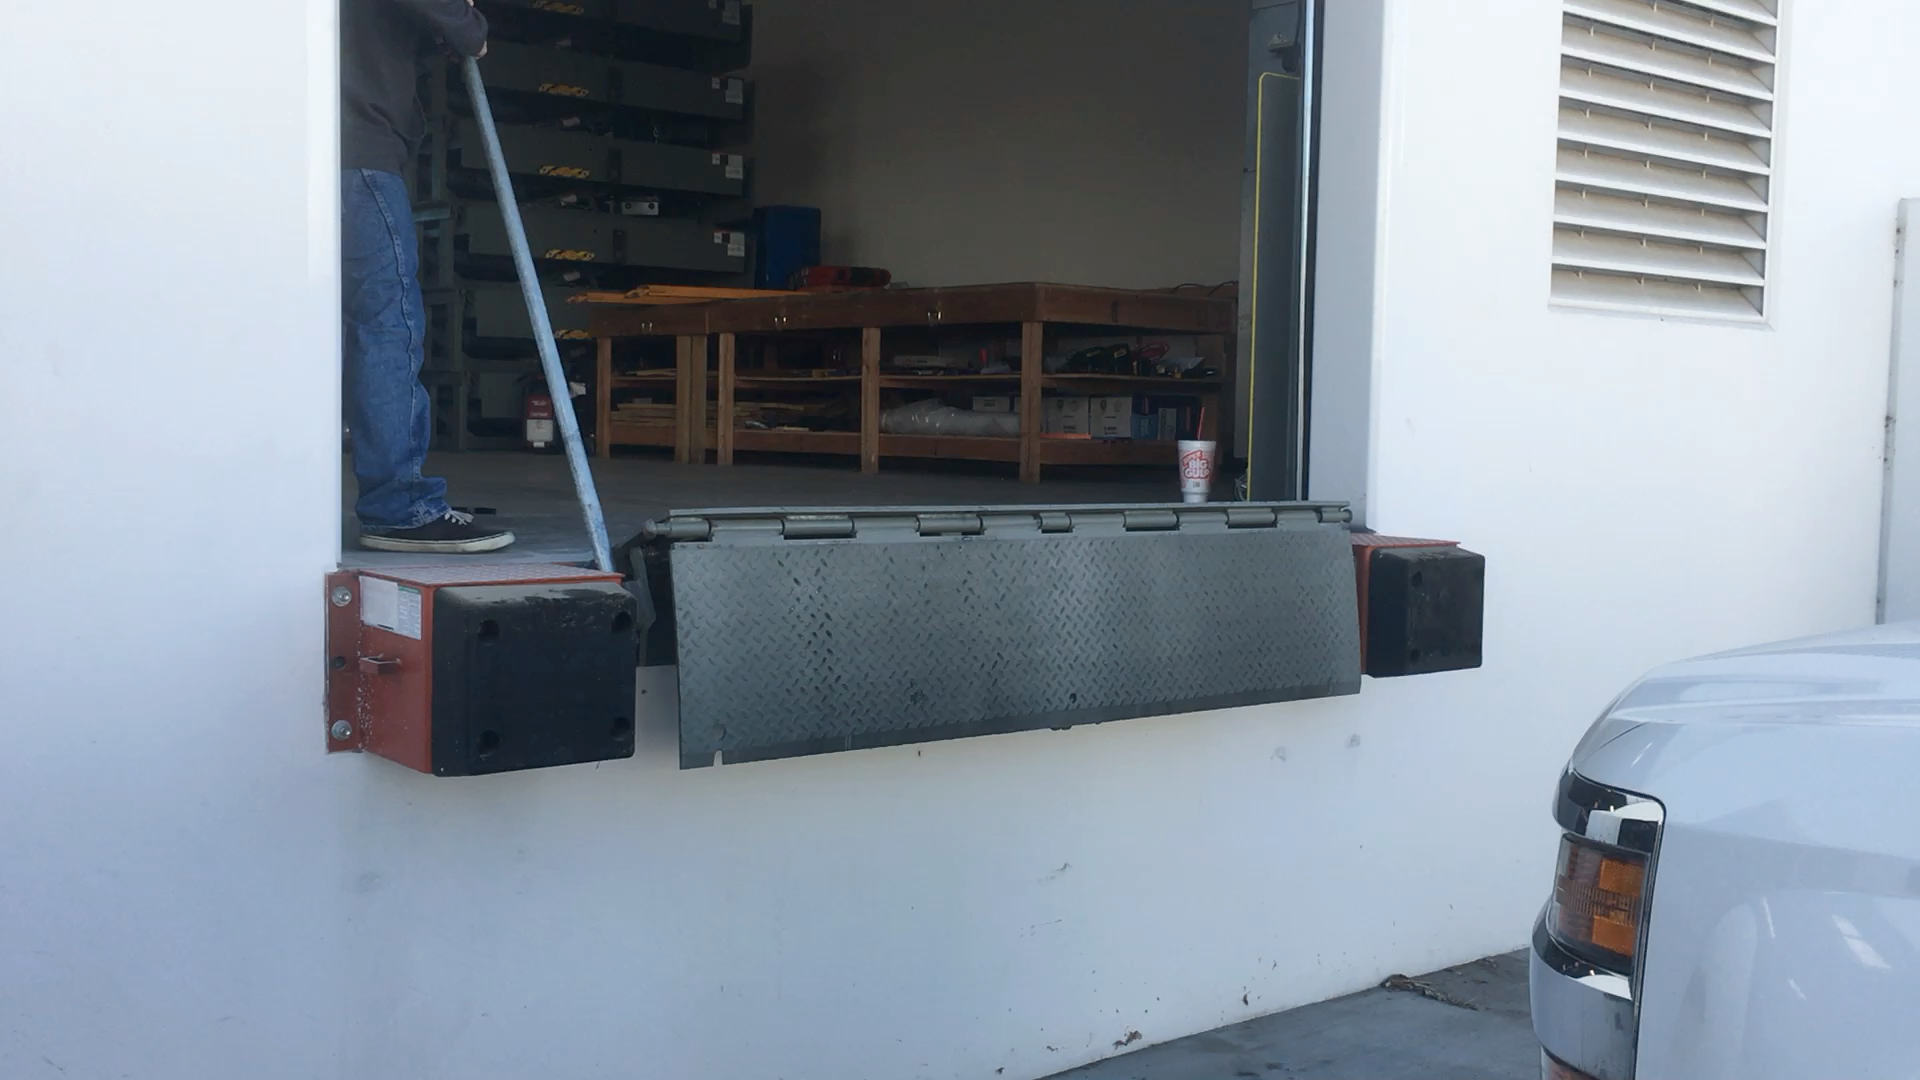 A loading dock with a dock leveler and a loading ramp